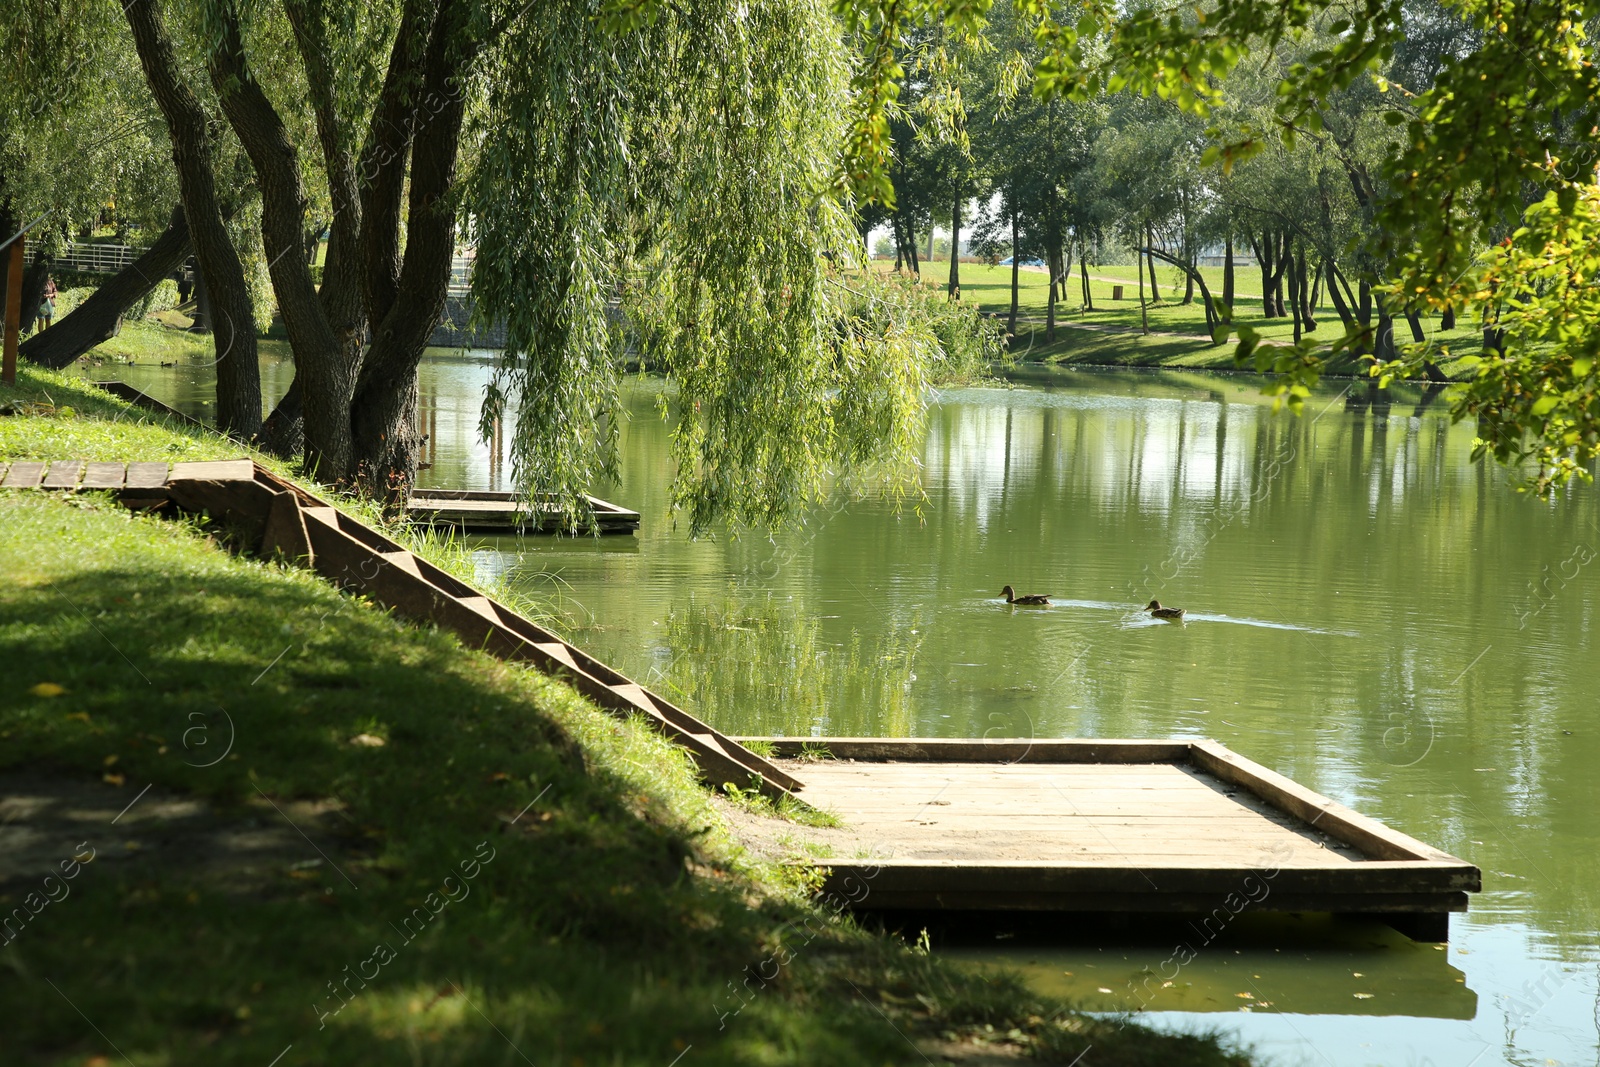 Photo of Quiet park with green trees and pond on sunny day